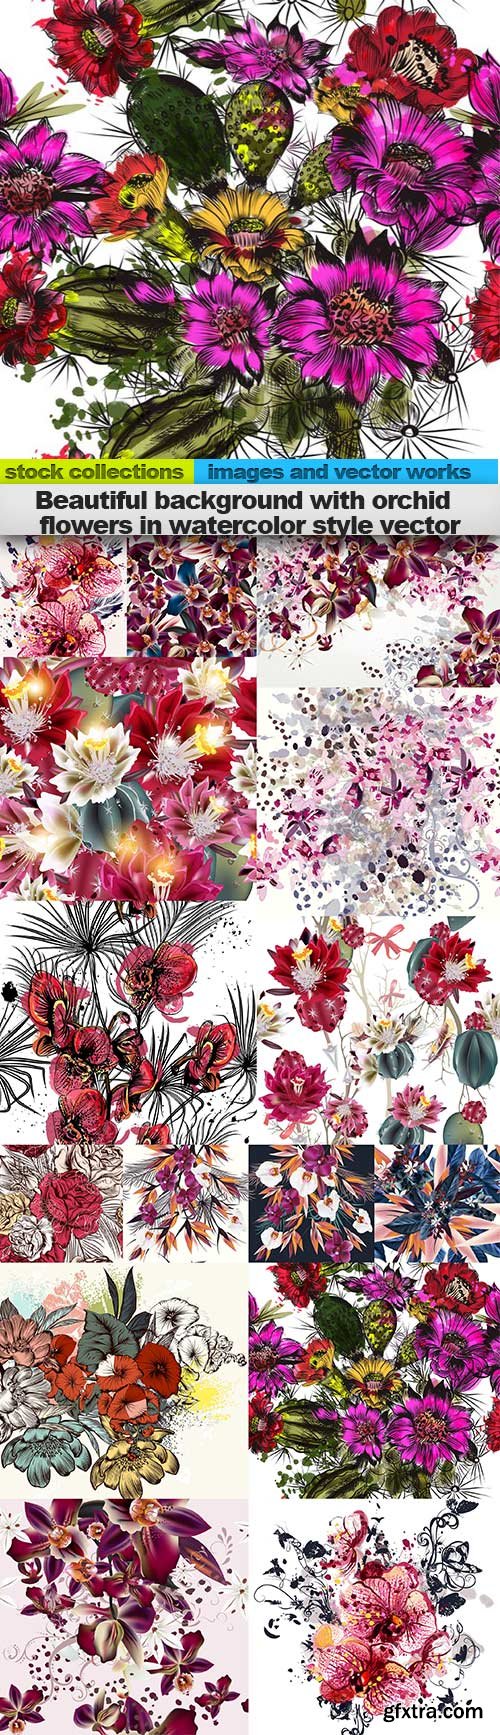 Beautiful background with orchid flowers in watercolor style vector, 15 x EPS